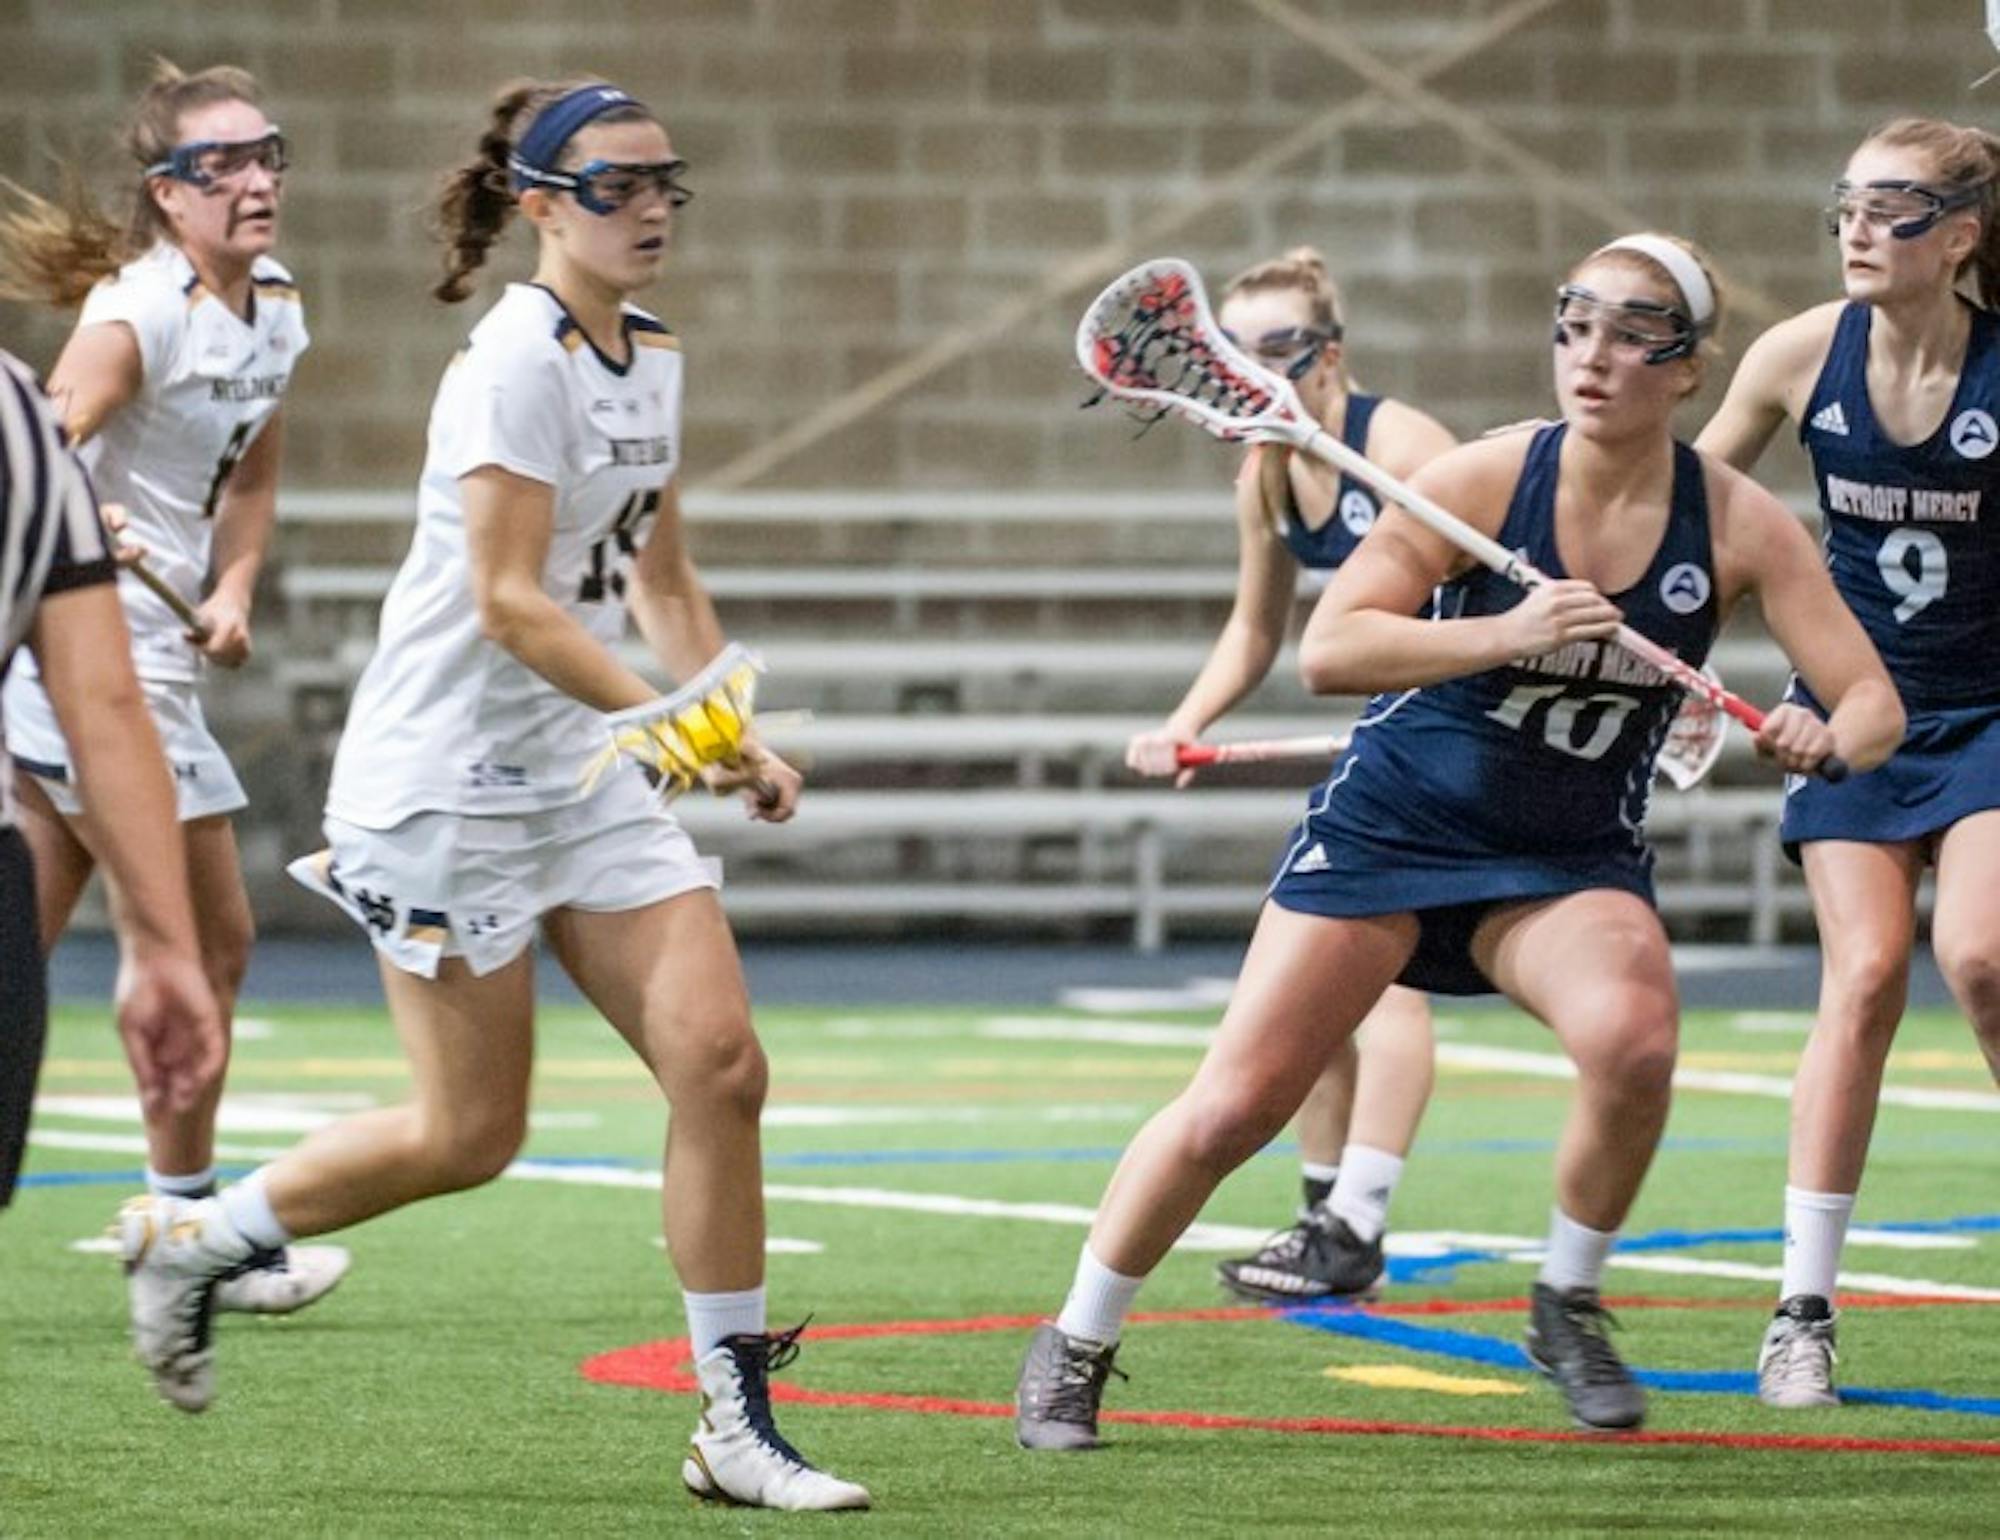 Irish senior attack Cortney Fortunato cradles the ball and surveys the field during Notre Dame’s 24-9 win over Detroit on Feb. 11 at Loftus Sports Center. Fortunato scored six goals and added four assists in the win.